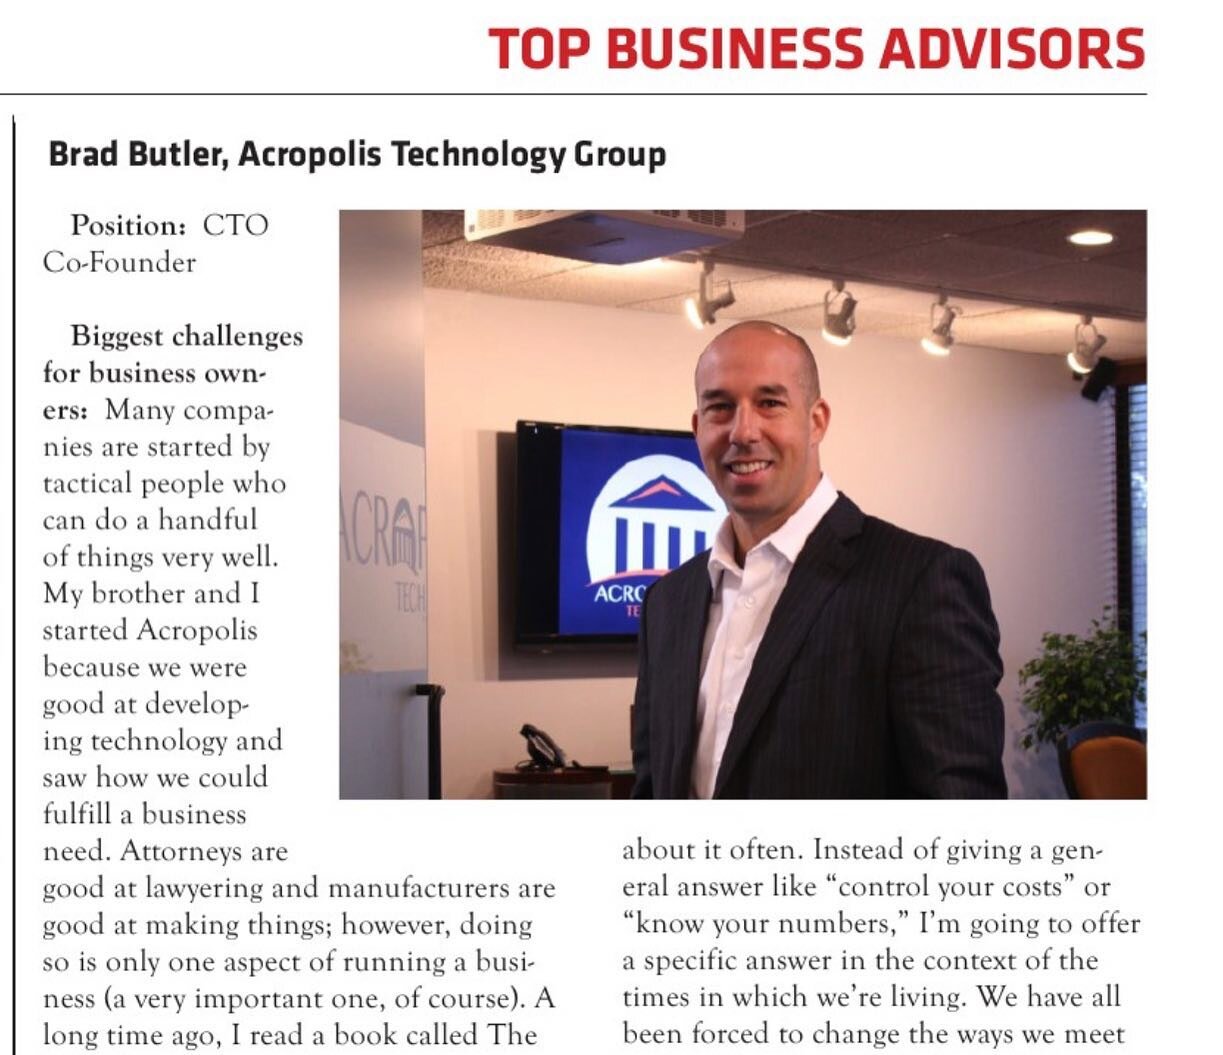 Congrats to Brad Butler for his amazing article in St. Louis Small Business Monthly and being named Top Business Advisor in 2021! See link for the full article: 

#linkinbio

#acropolistech #topbusinessadvisor #stlouissmallbusinessmonthly #smallbusin